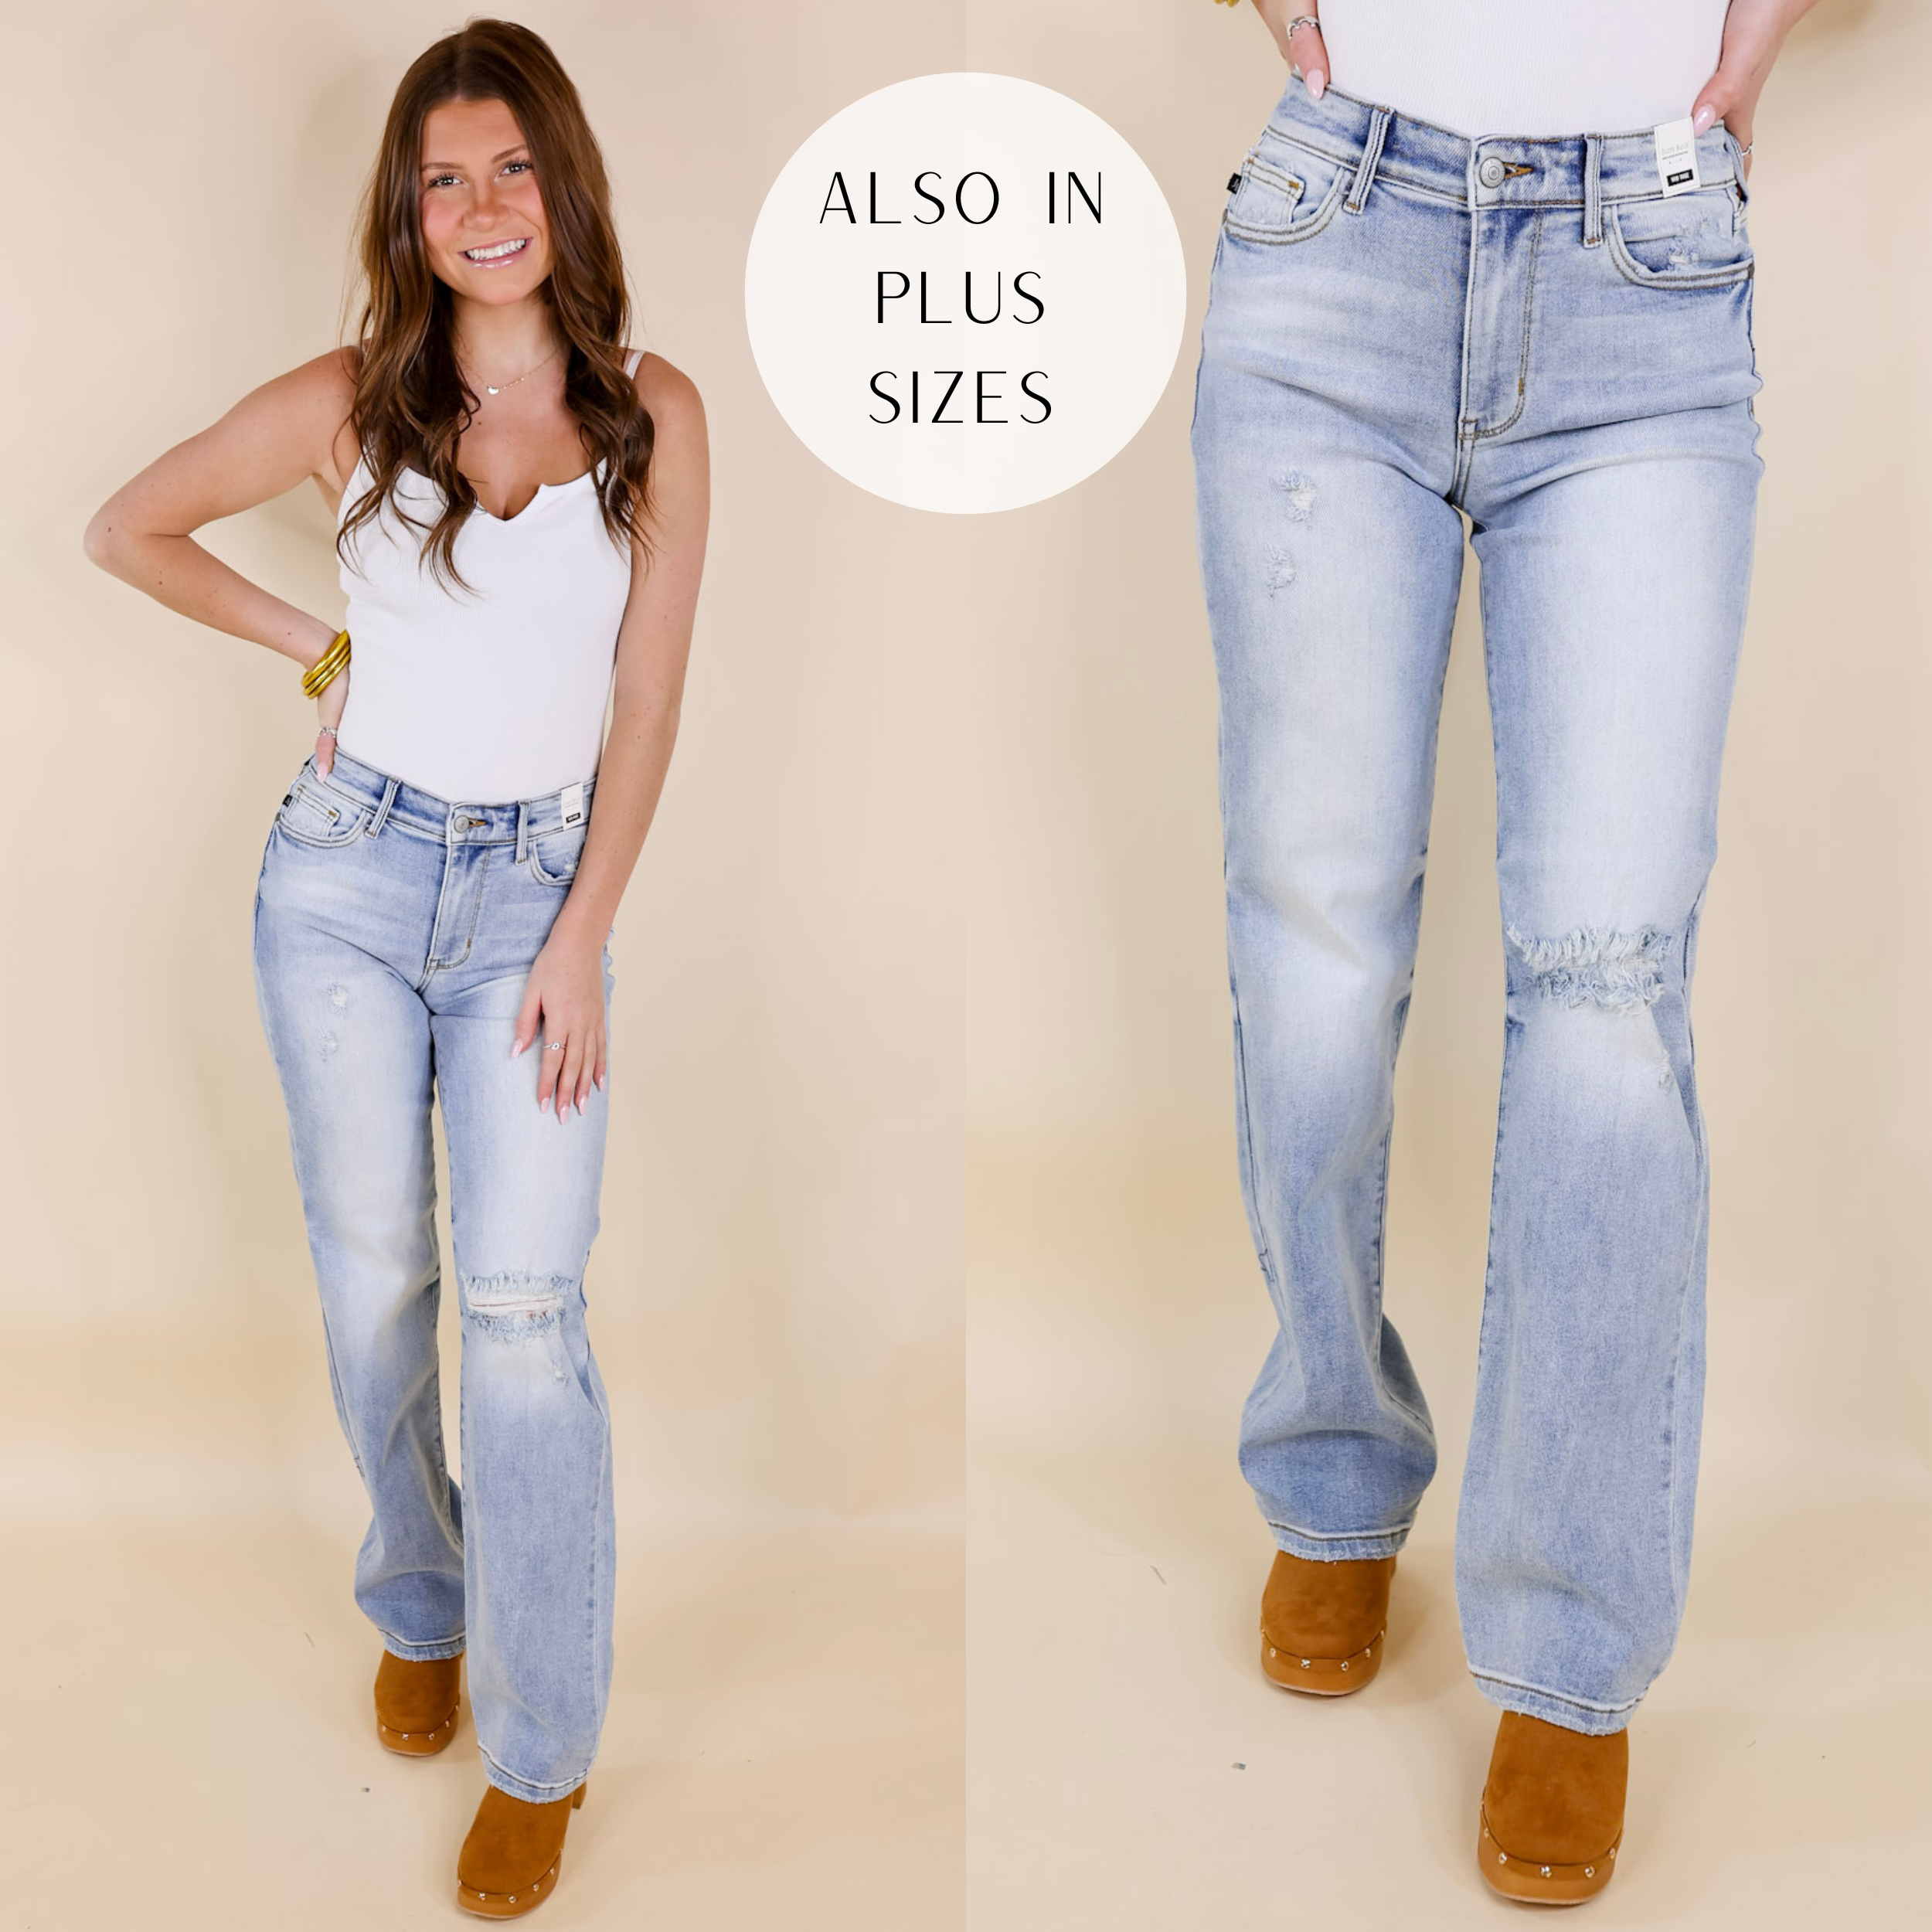 Model is wearing a pair of light wash, straight leg jeans with a distressed left knee. Model has it paired with a white bodysuit, brown clogs, and gold jewelry.